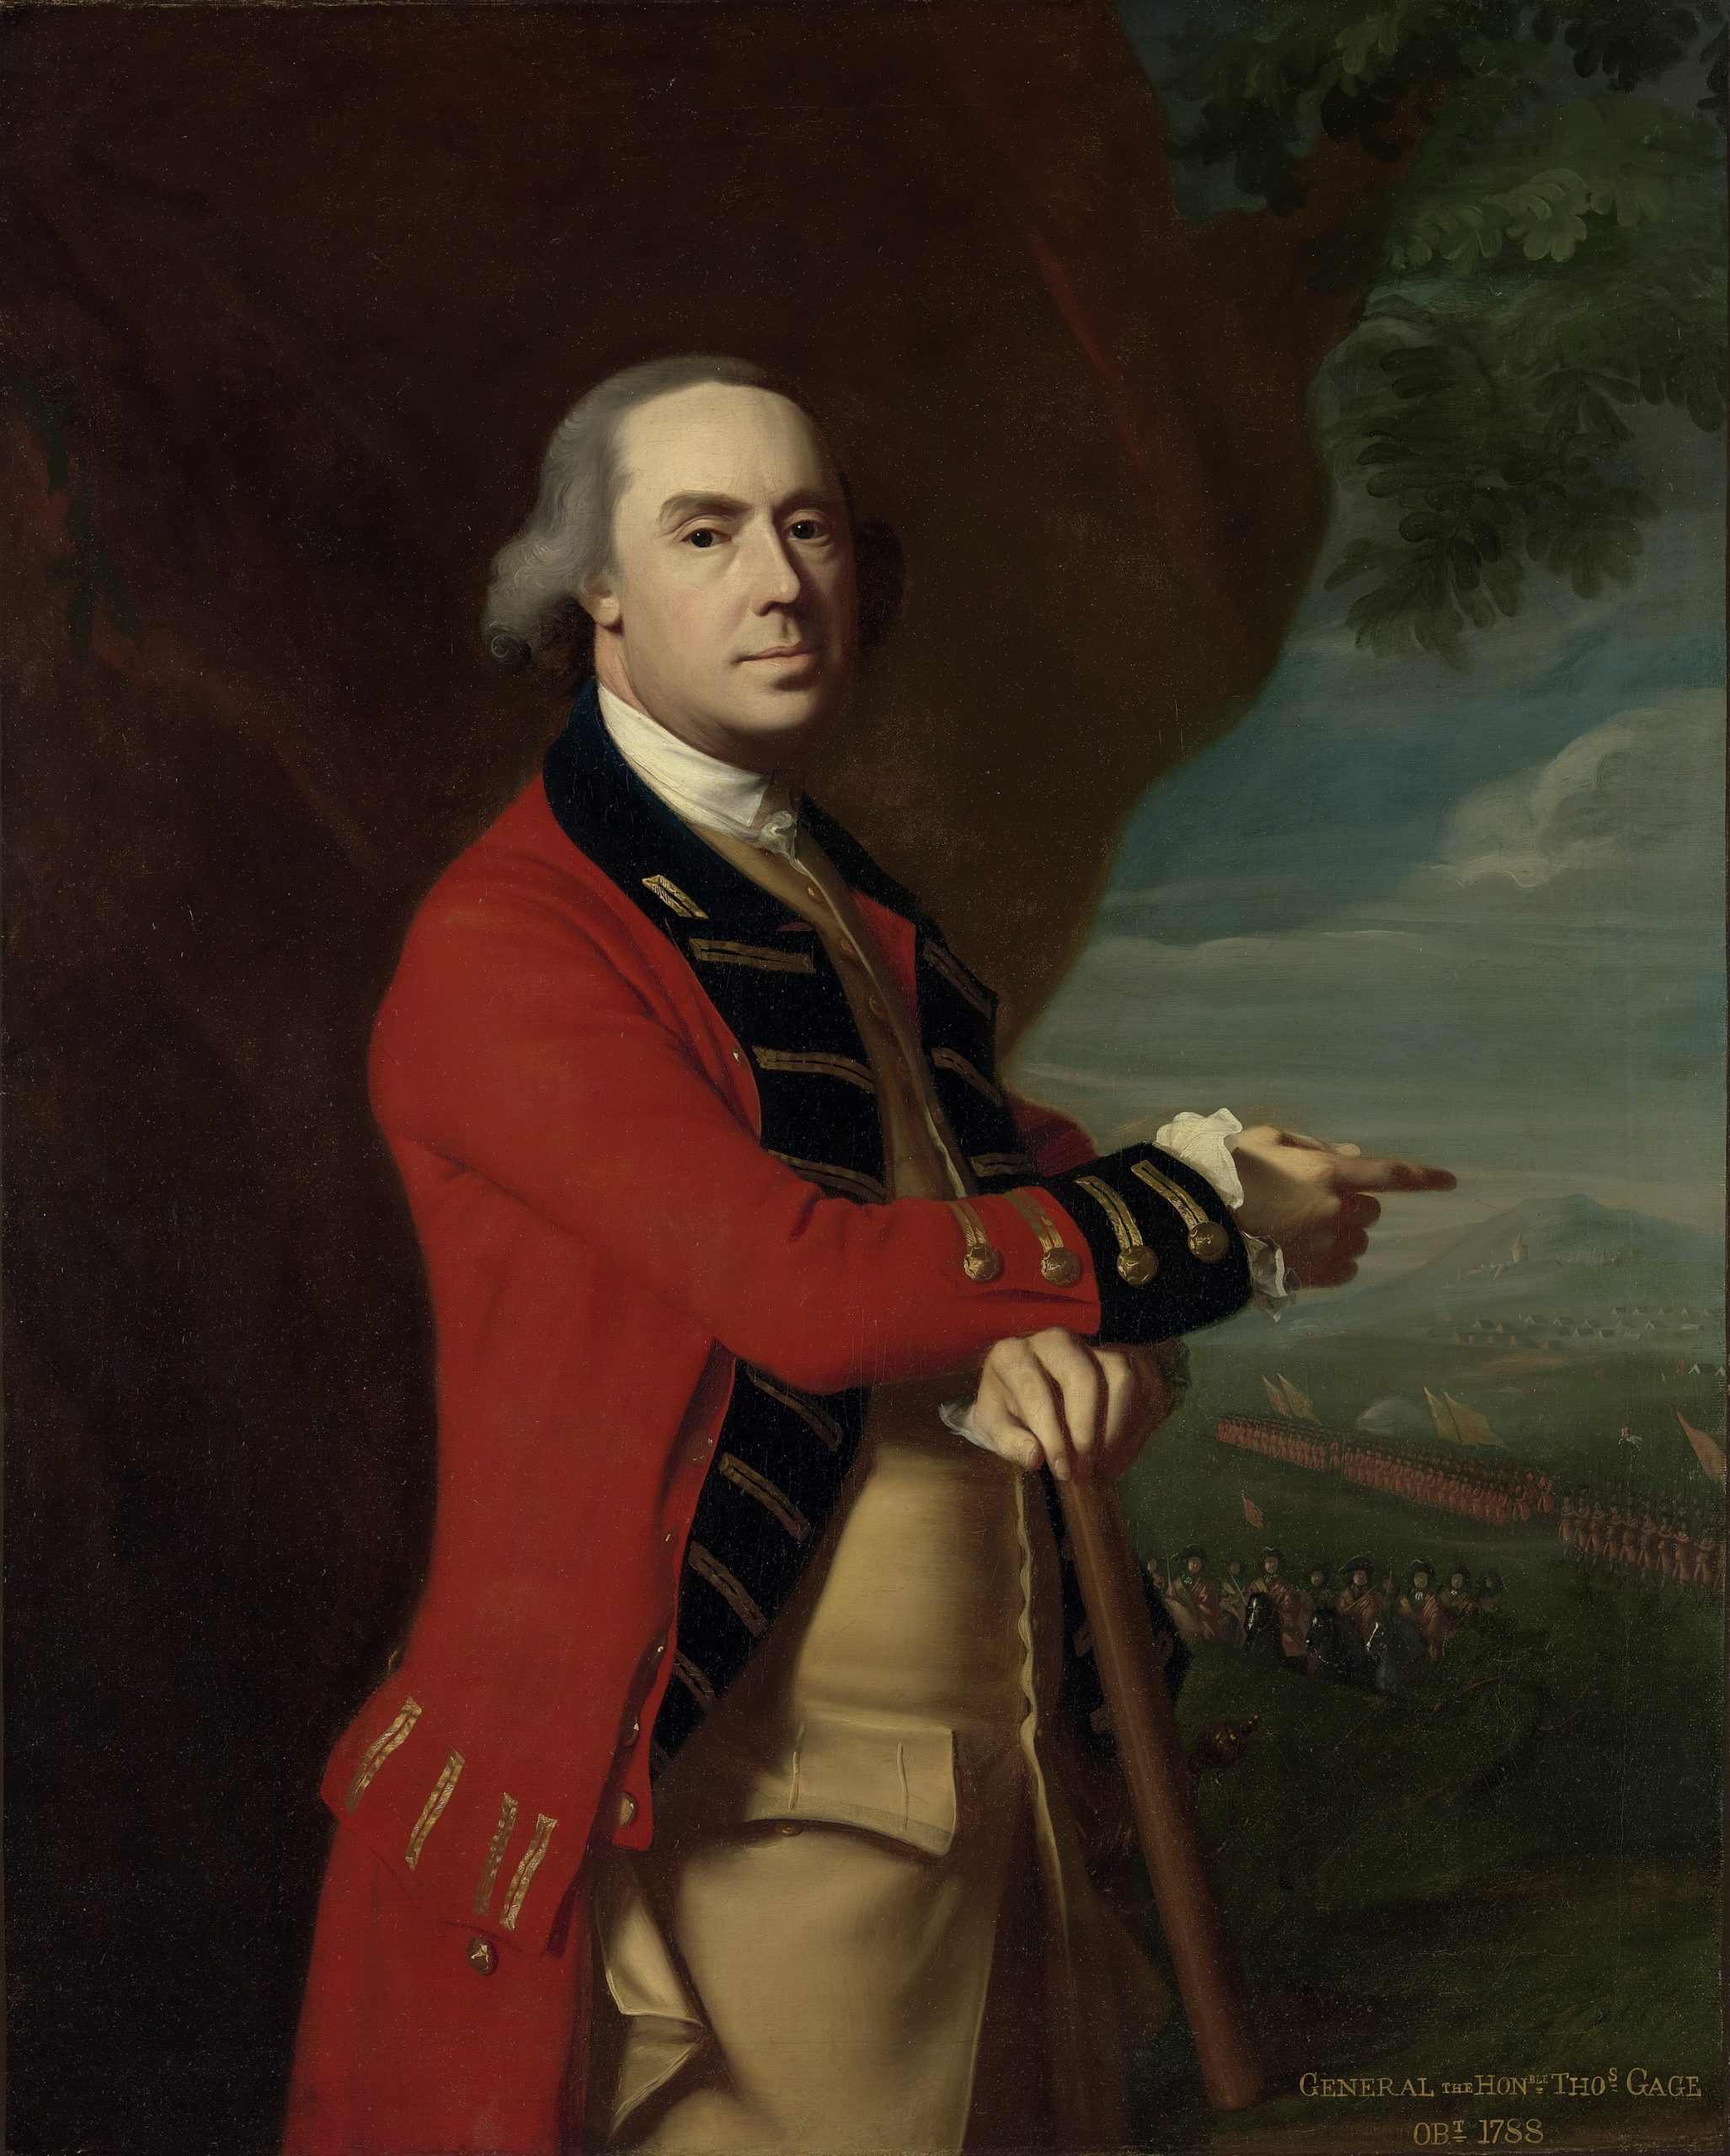 John Singleton Copley painted this portrait of General Thomas Gage in 1768.